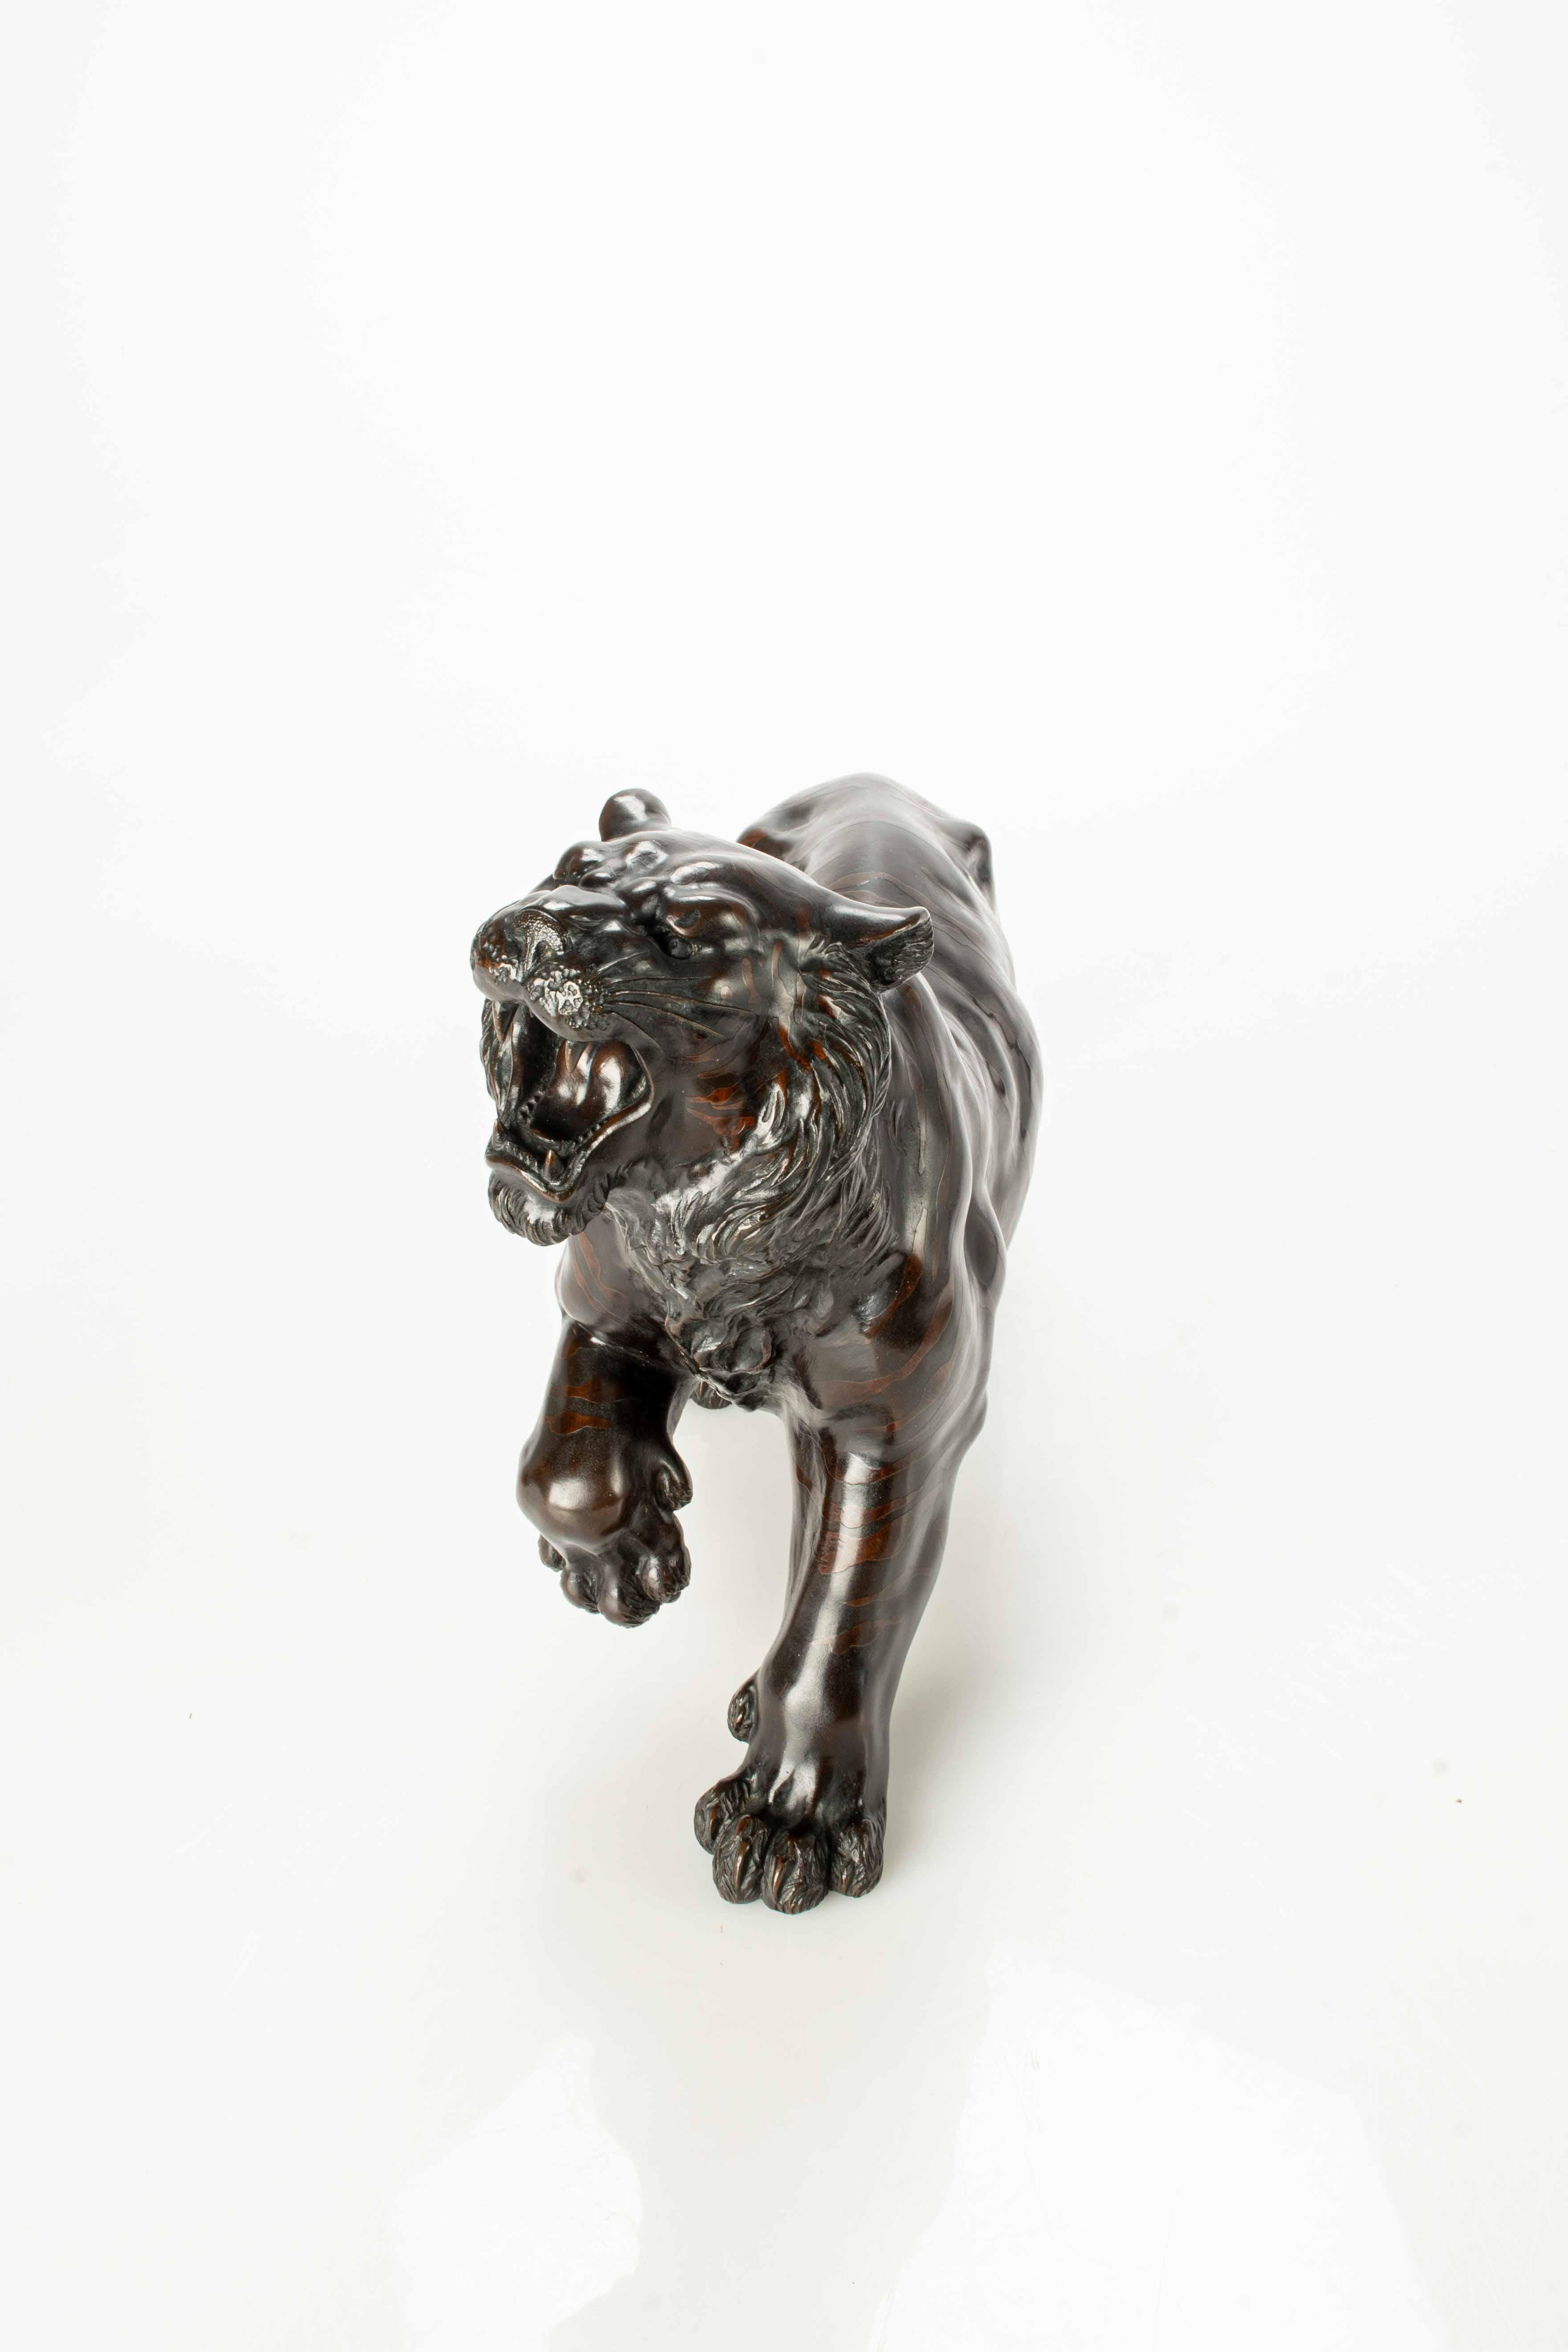 Dark patina bronze okimono depicting the study of a powerful tiger in an unusual position.

The animal's posture is engaging with the paw raised and the tail curled upwards along the end. The streaks of the fur are highlighted with a marked